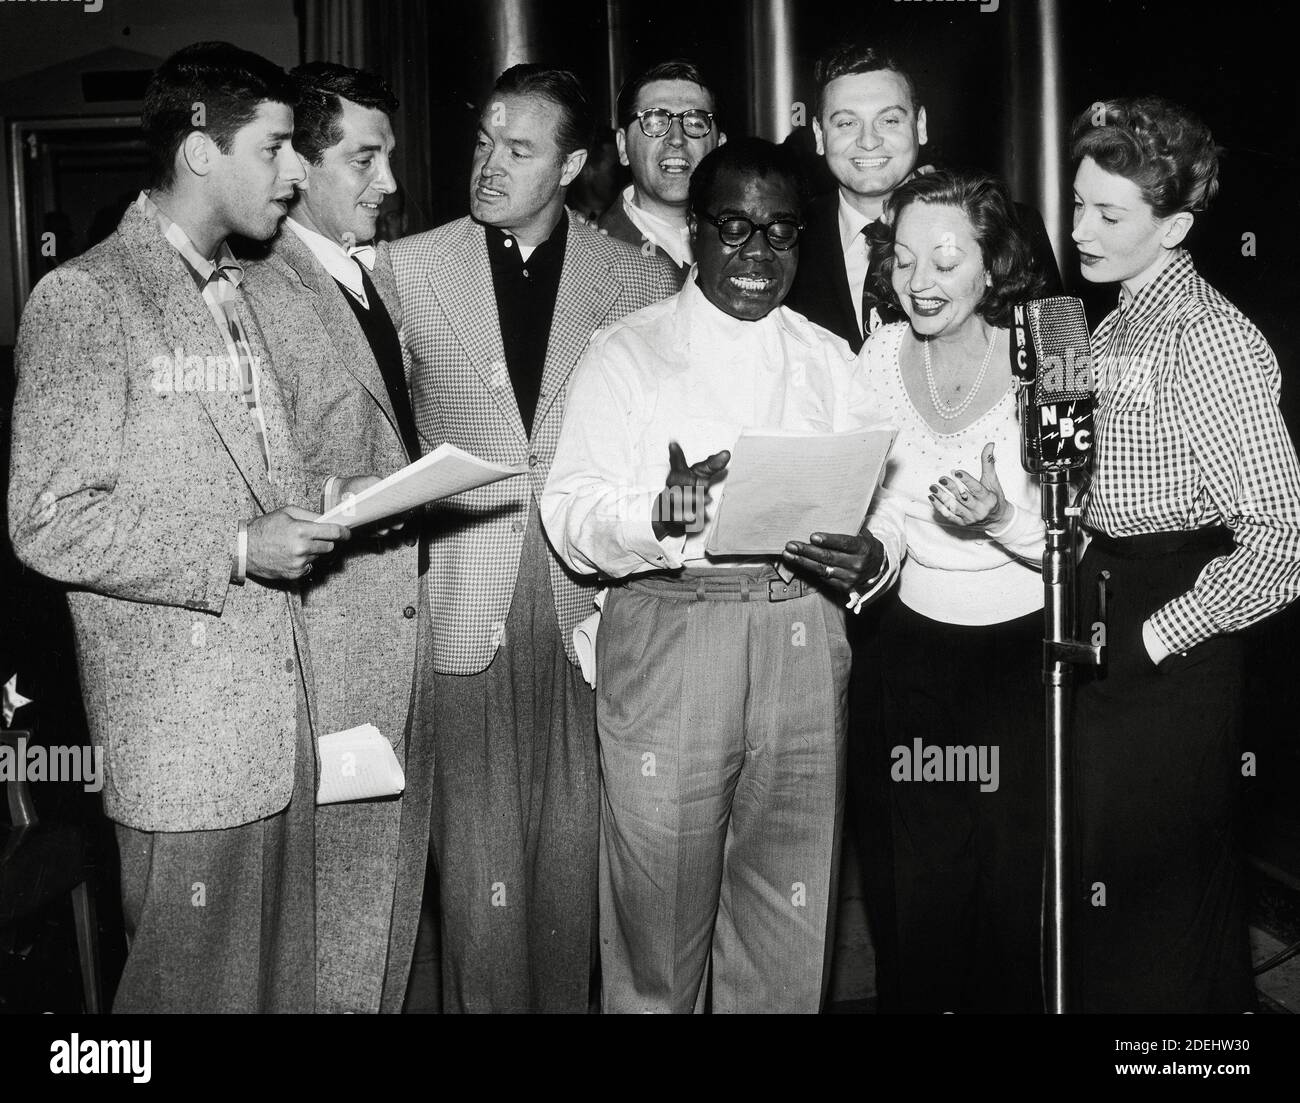 Jerry Lewis, Dean Martin, Bob Hope, Meredith Willson, Louis Armstrong, Frankie Laine, Tallulah Bankhead and Deborah Kerr, at an NBC radio broadcast, circa 1952 / File Reference # 34000-871THA Stock Photo